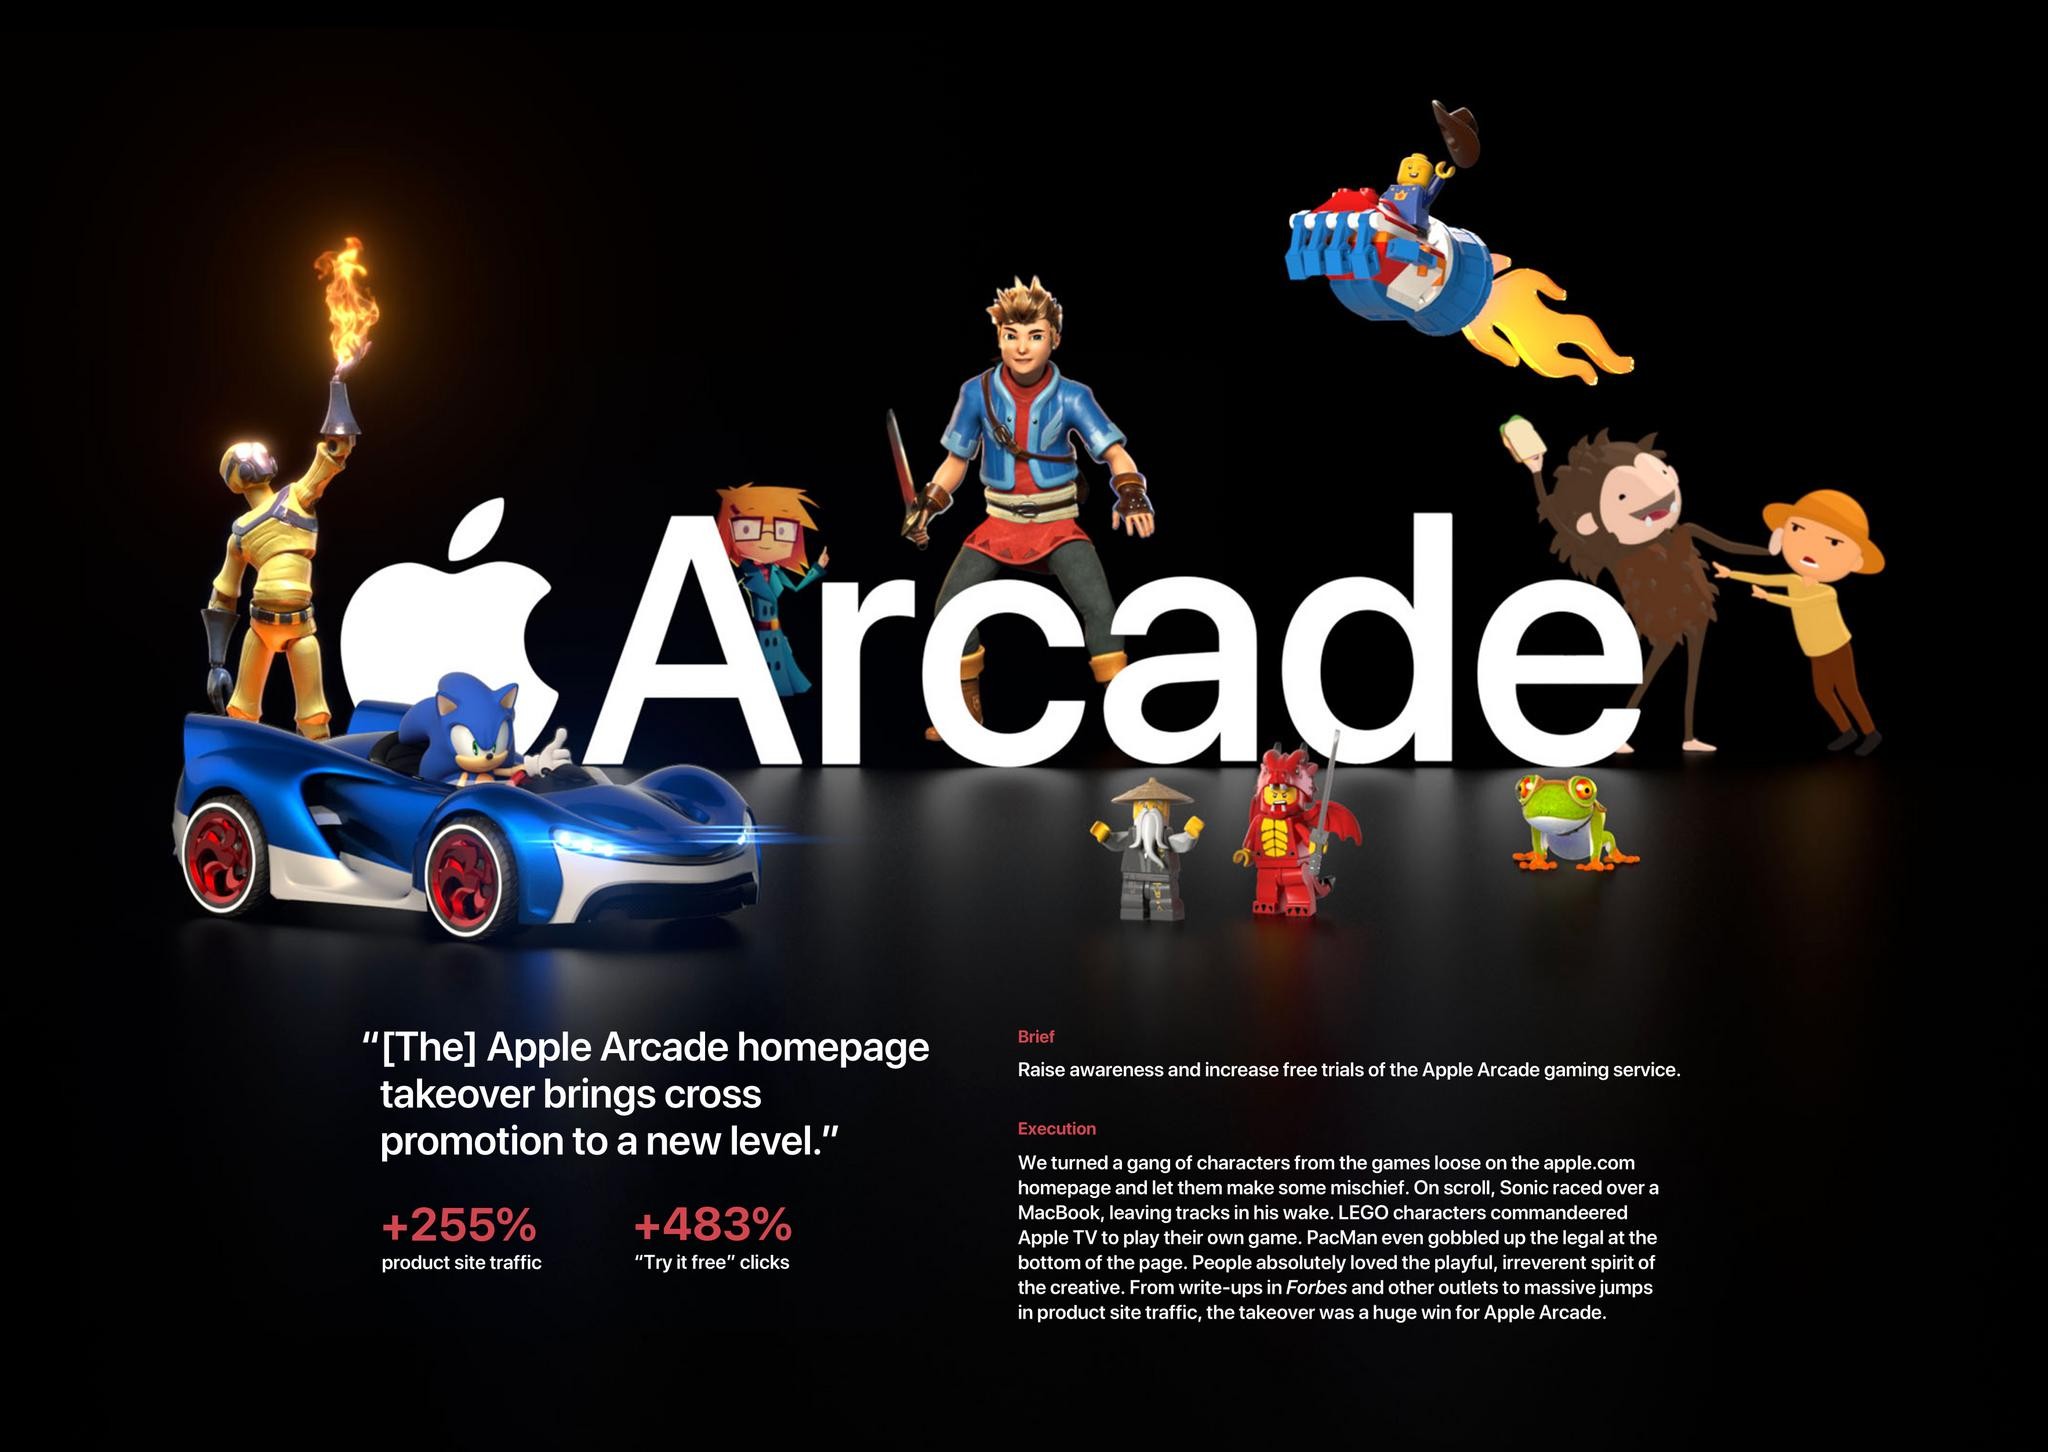 Apple Arcade: Time for some mischief